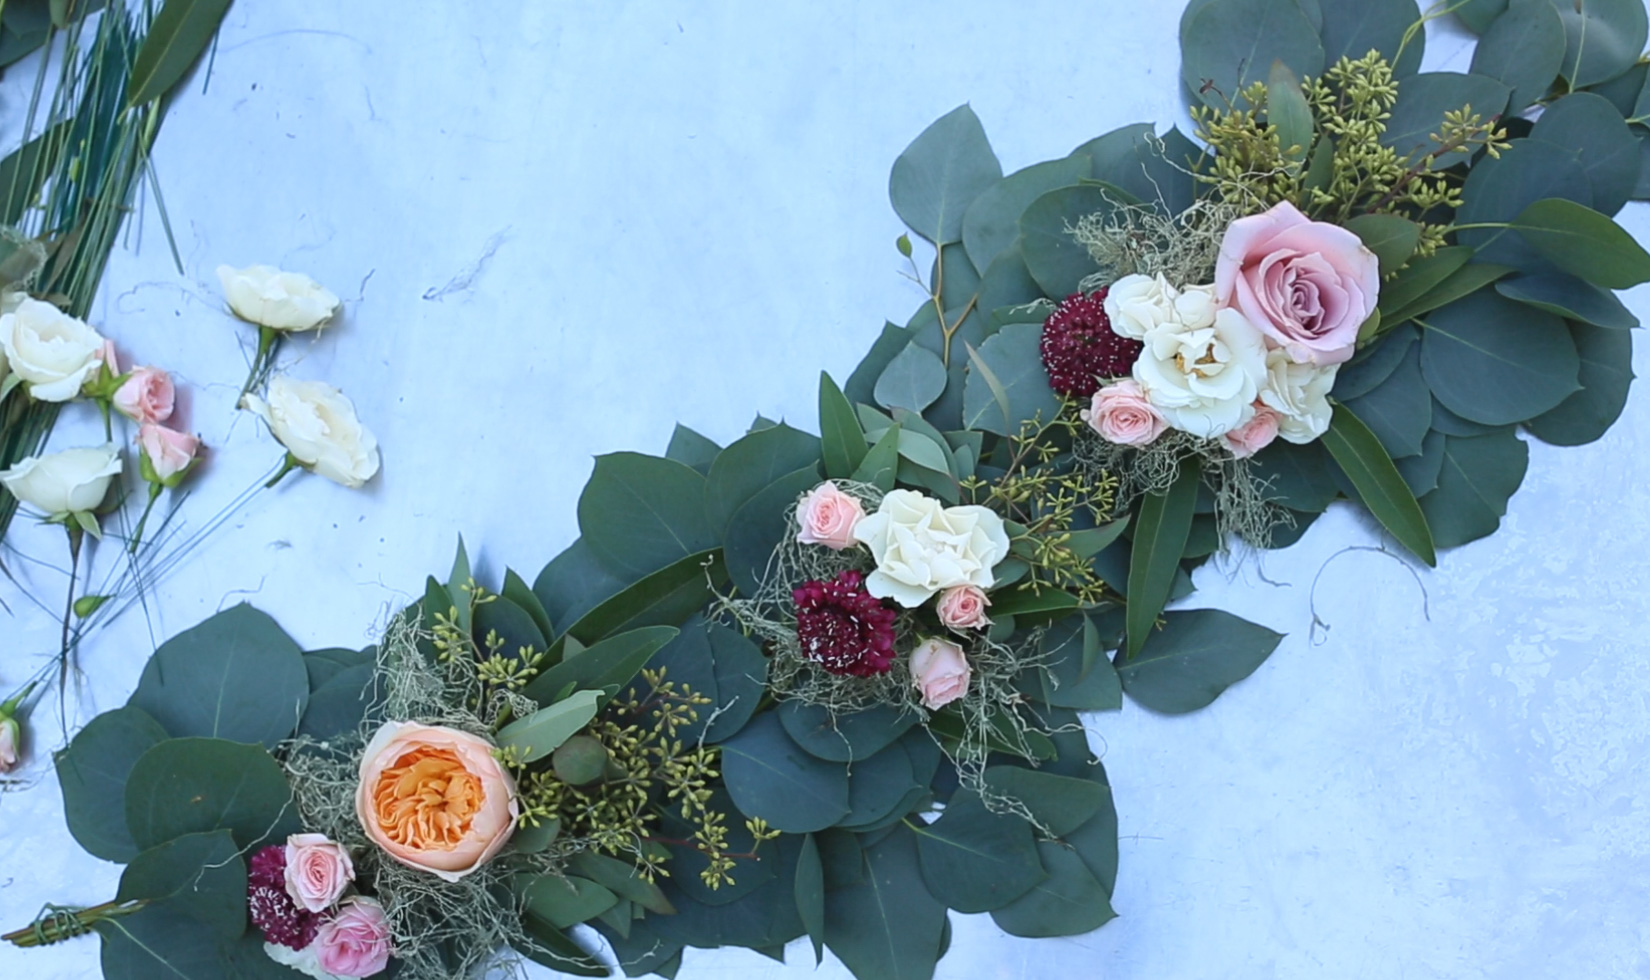 Finished greenery garland table runner with mini flower bouquets